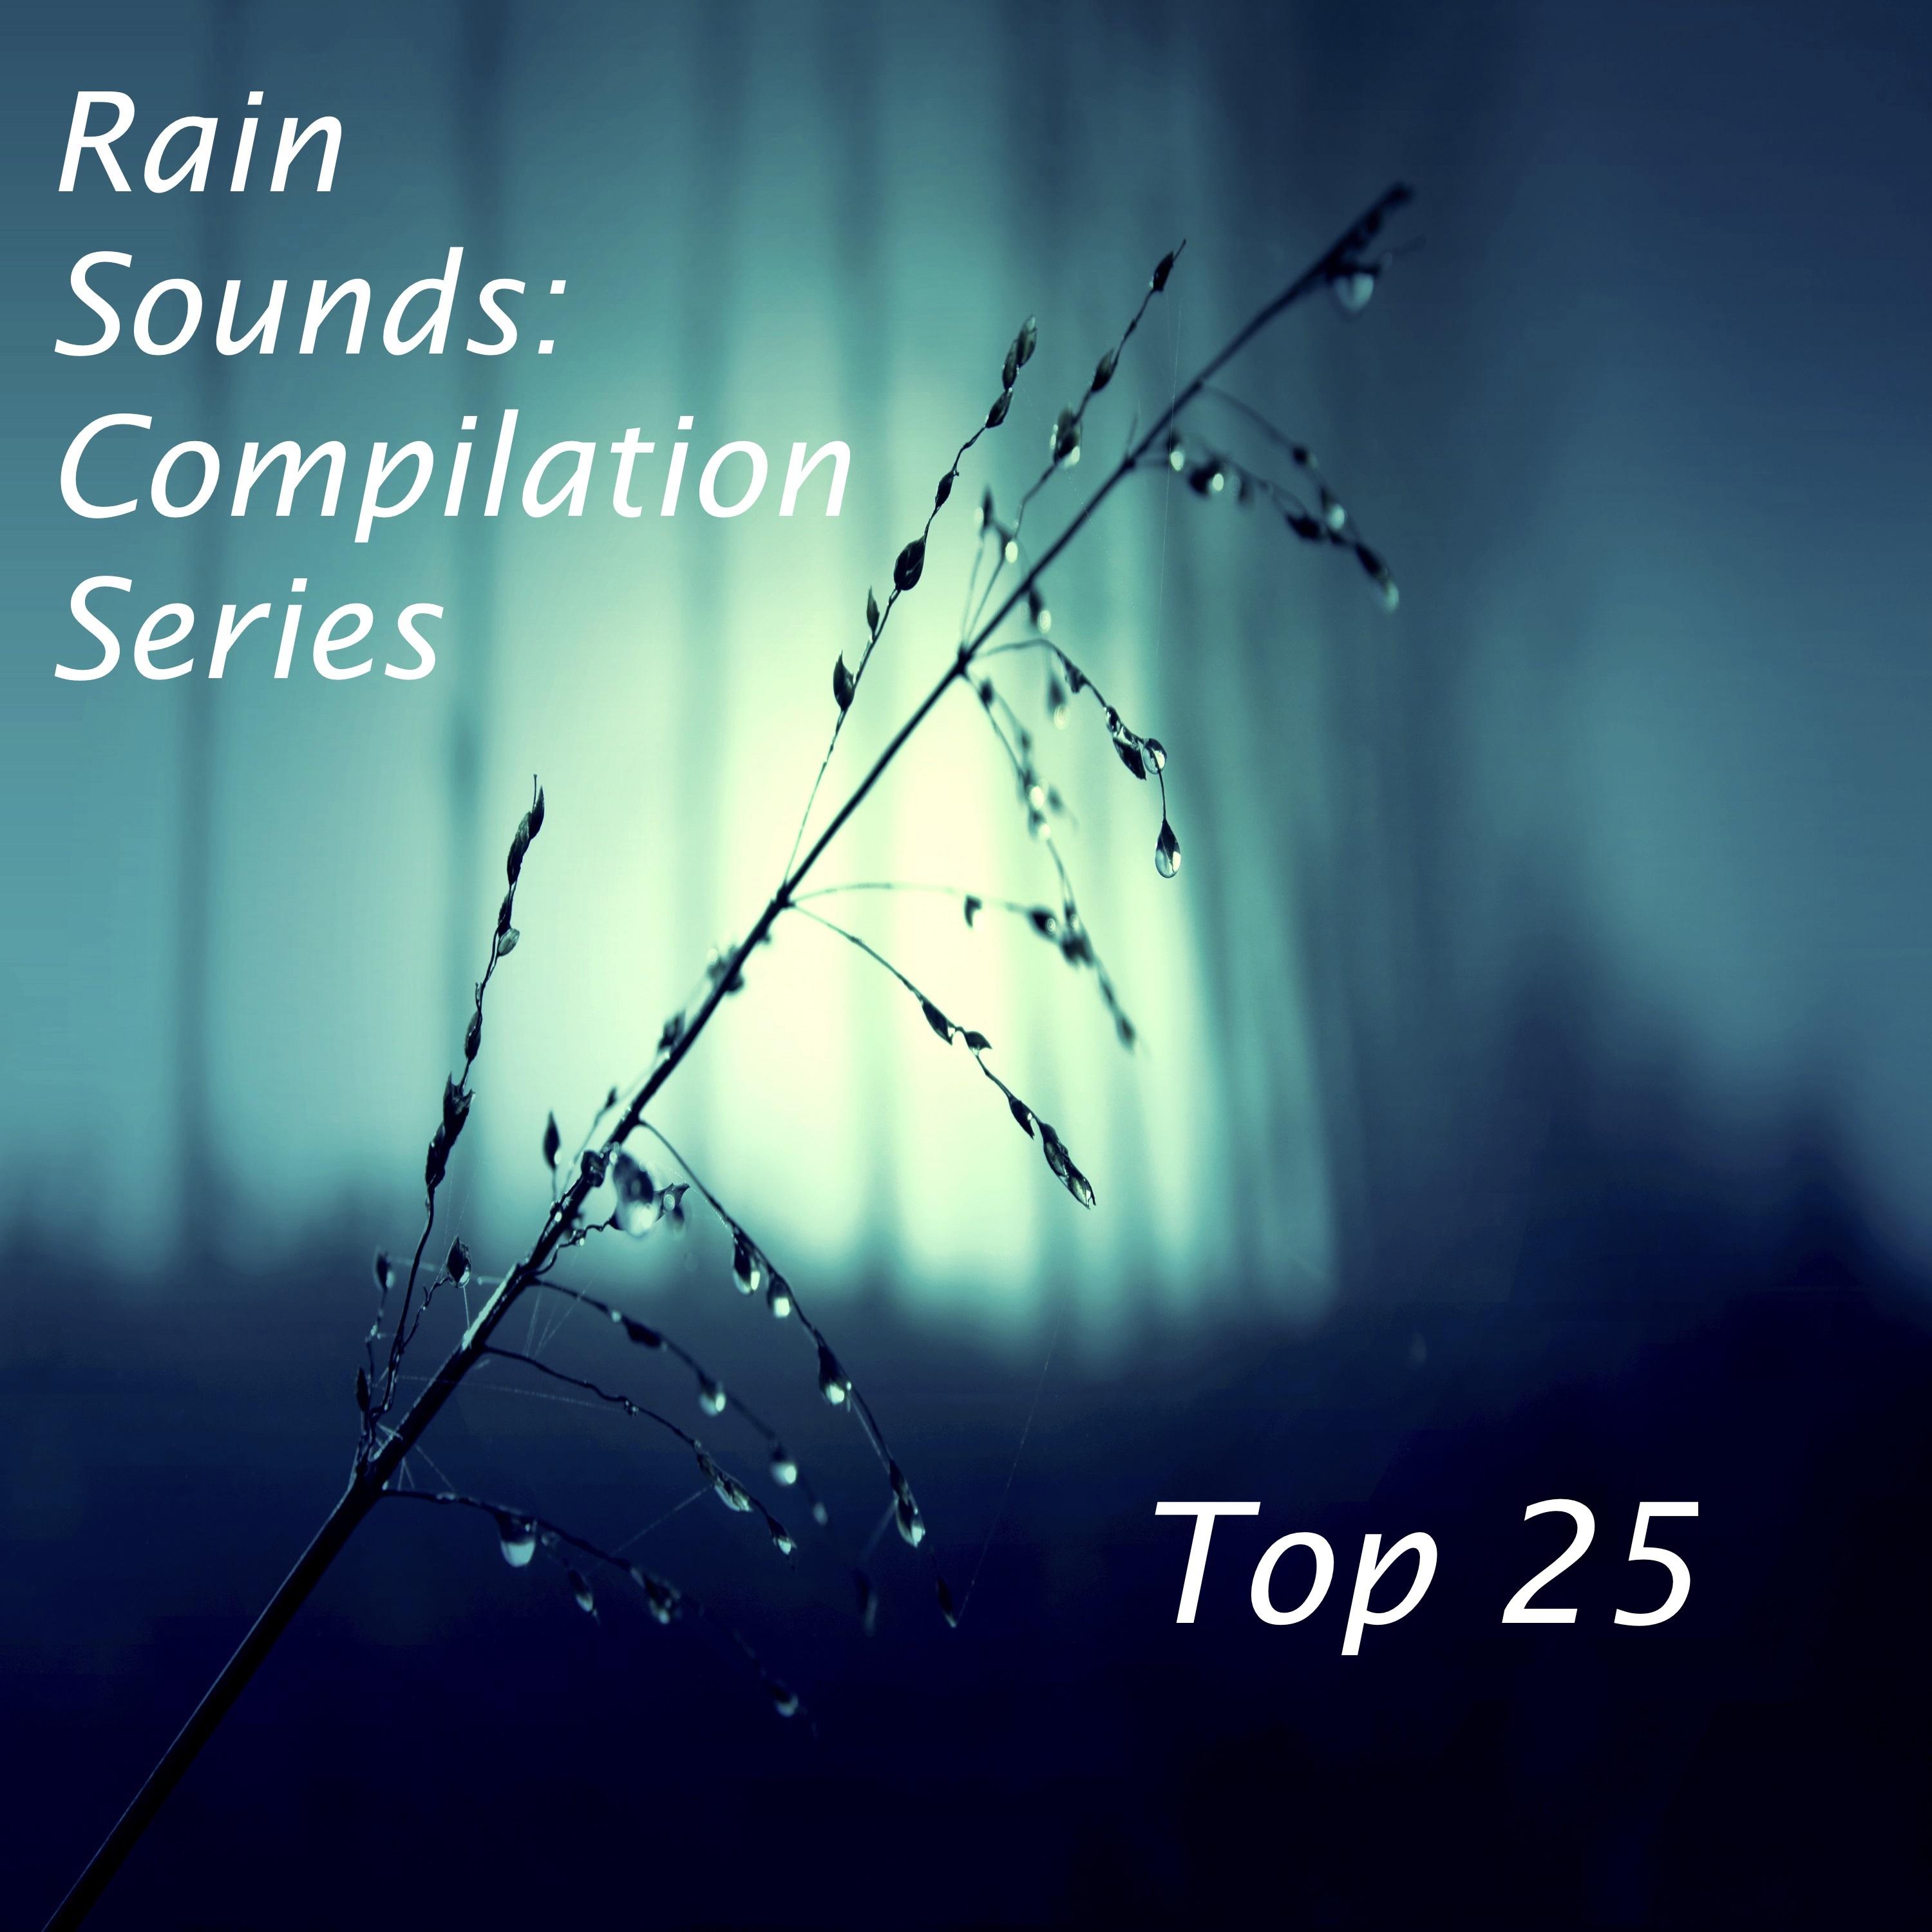 2017 Compilation: Top 25 Loopable Rain Sounds for Deep Sleep, Insomnia, Meditation and Relaxation